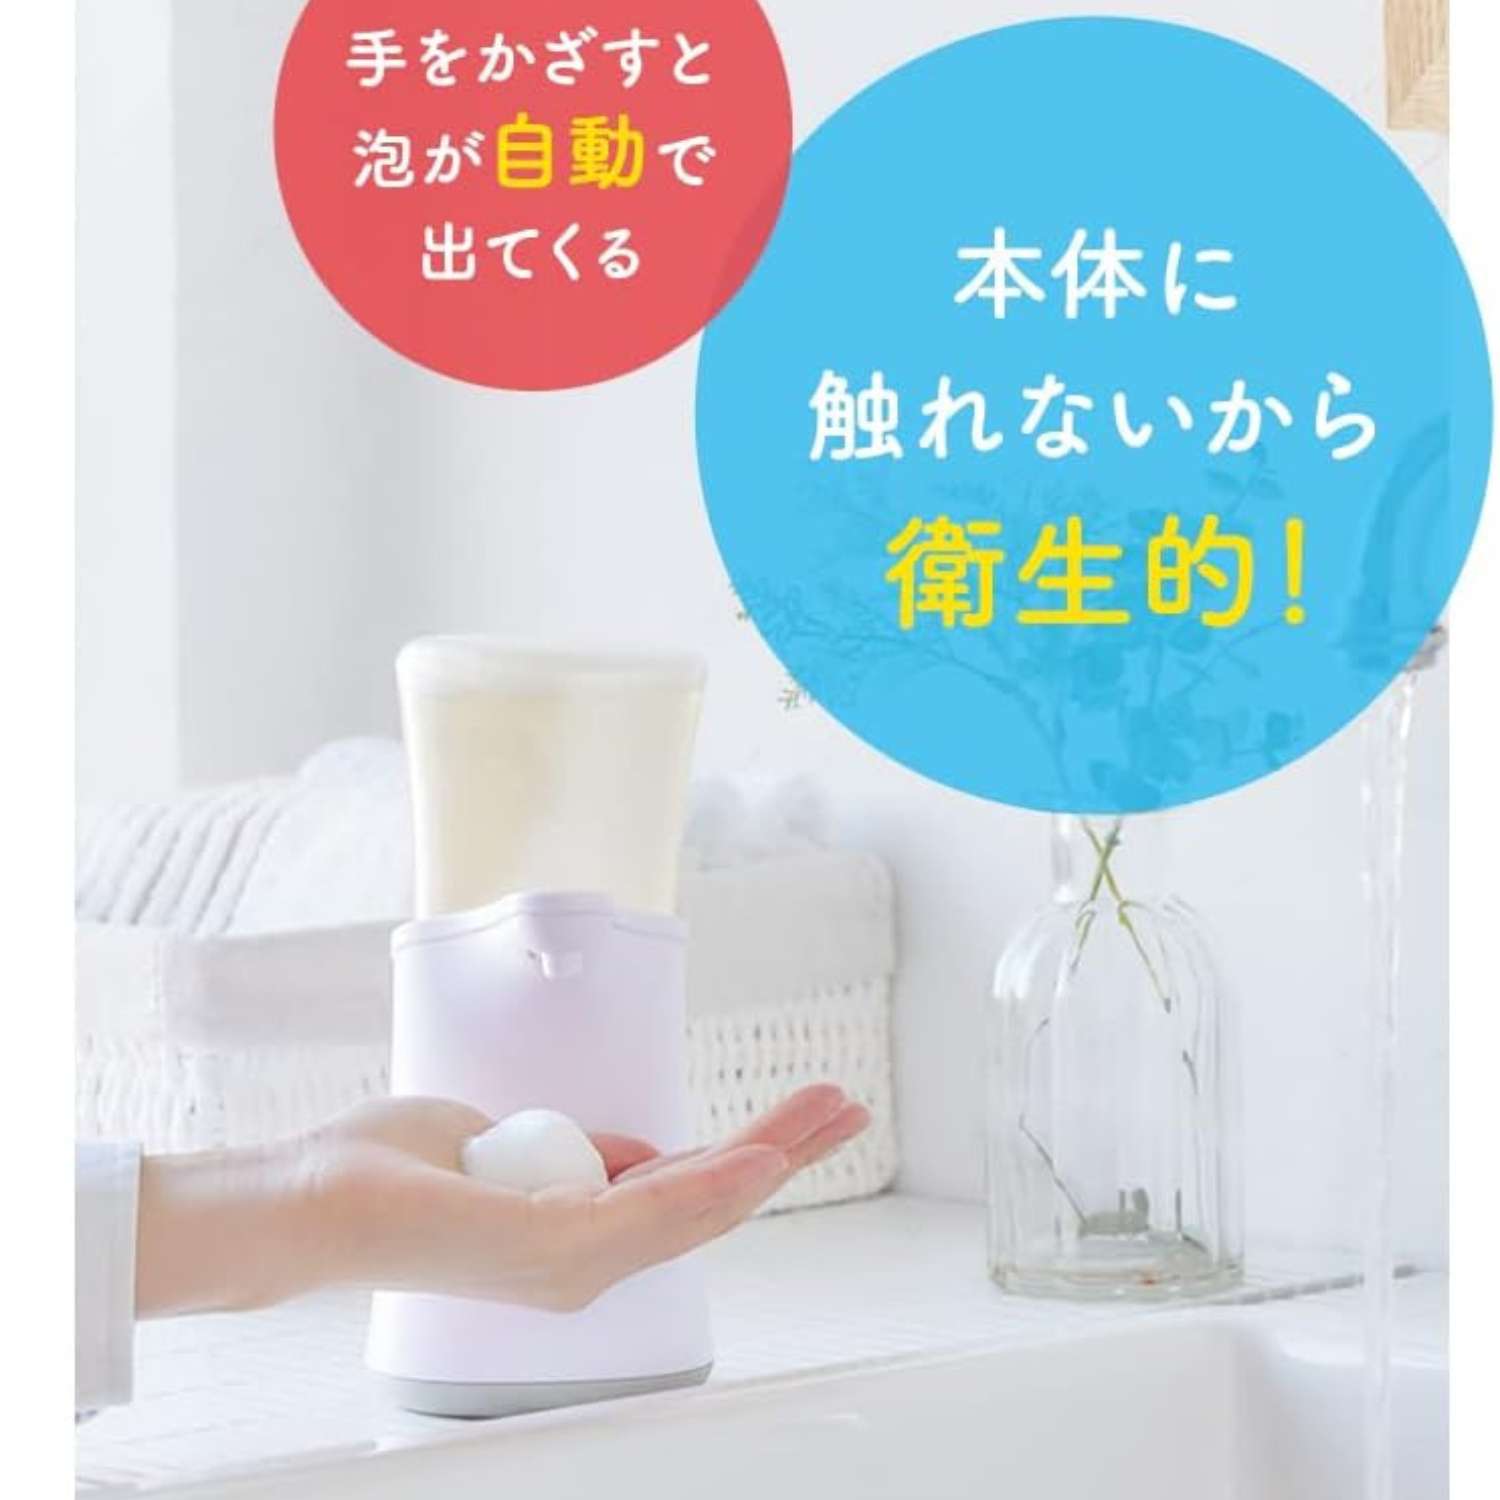 Muse Refill For Non Touch Soap Automatic Dispenser 250ml (Pack of 2) - Buy Me Japan